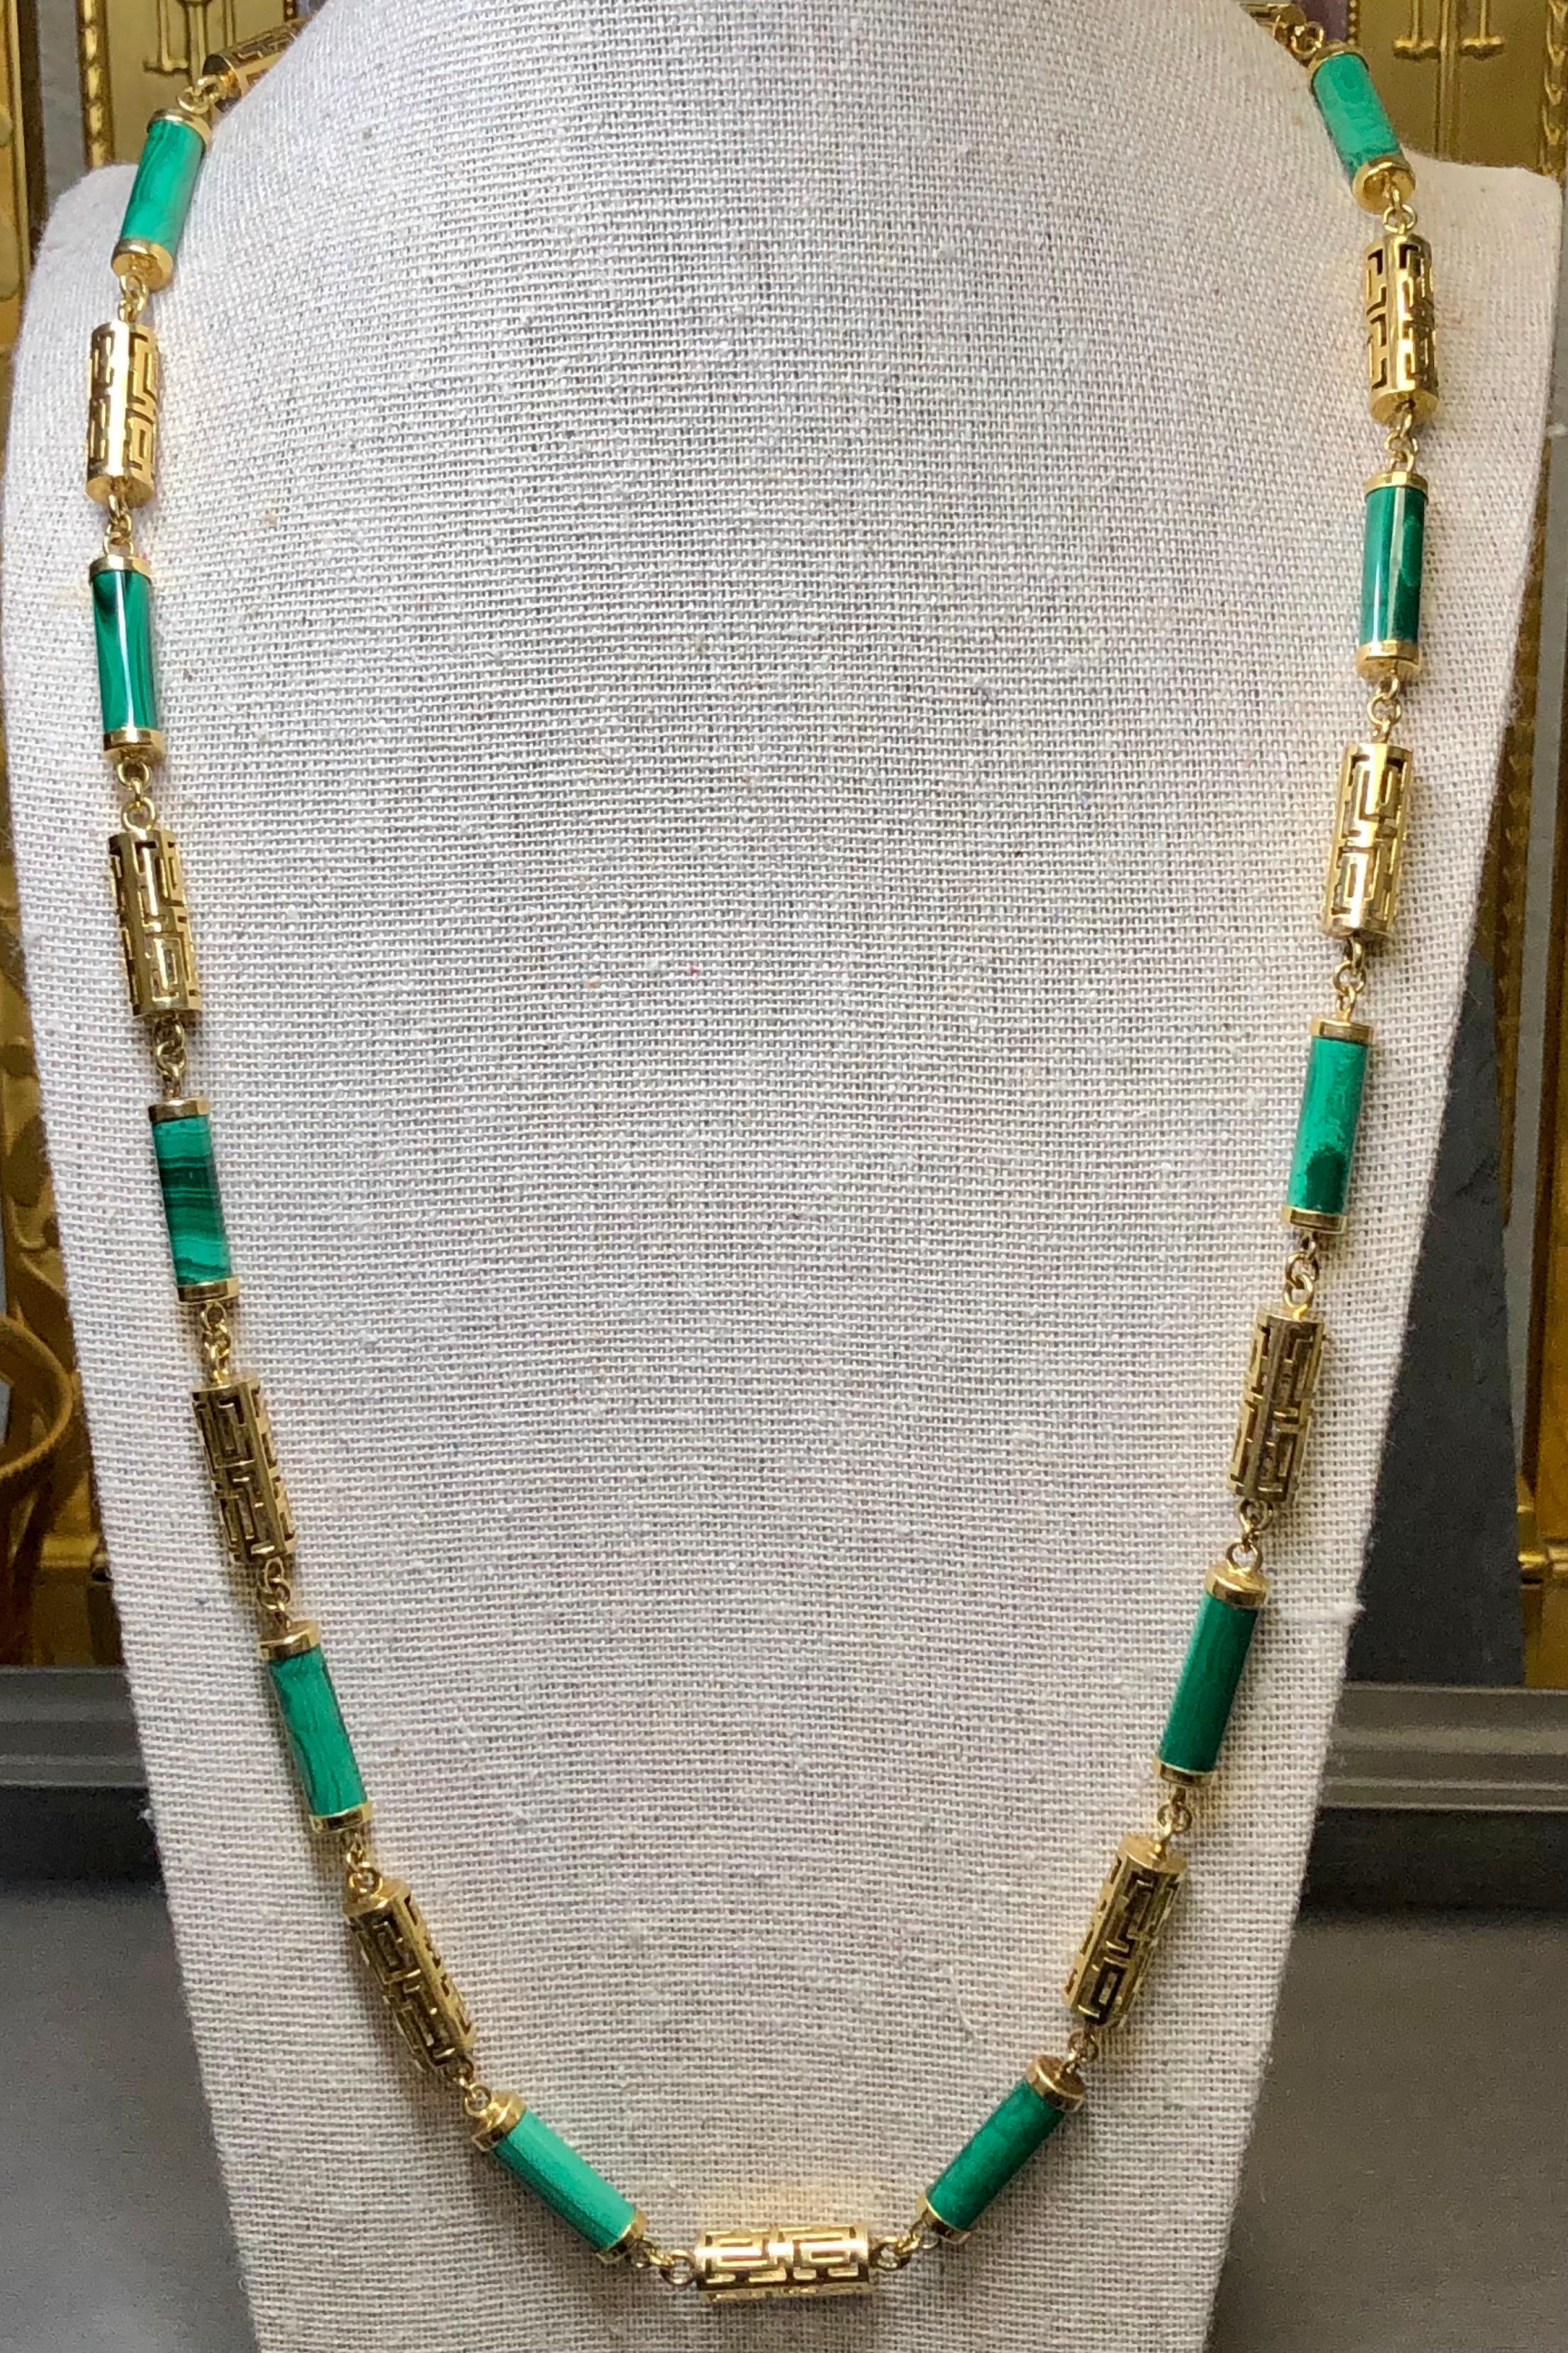 
An absolutely gorgeous and well made necklace done in 14K rich yellow gold and polished sections of gorgeous green malachite. It measures 26.25” in length and makes quite the statement when on. It’s such a look!


Dimensions/Weight:

Measures